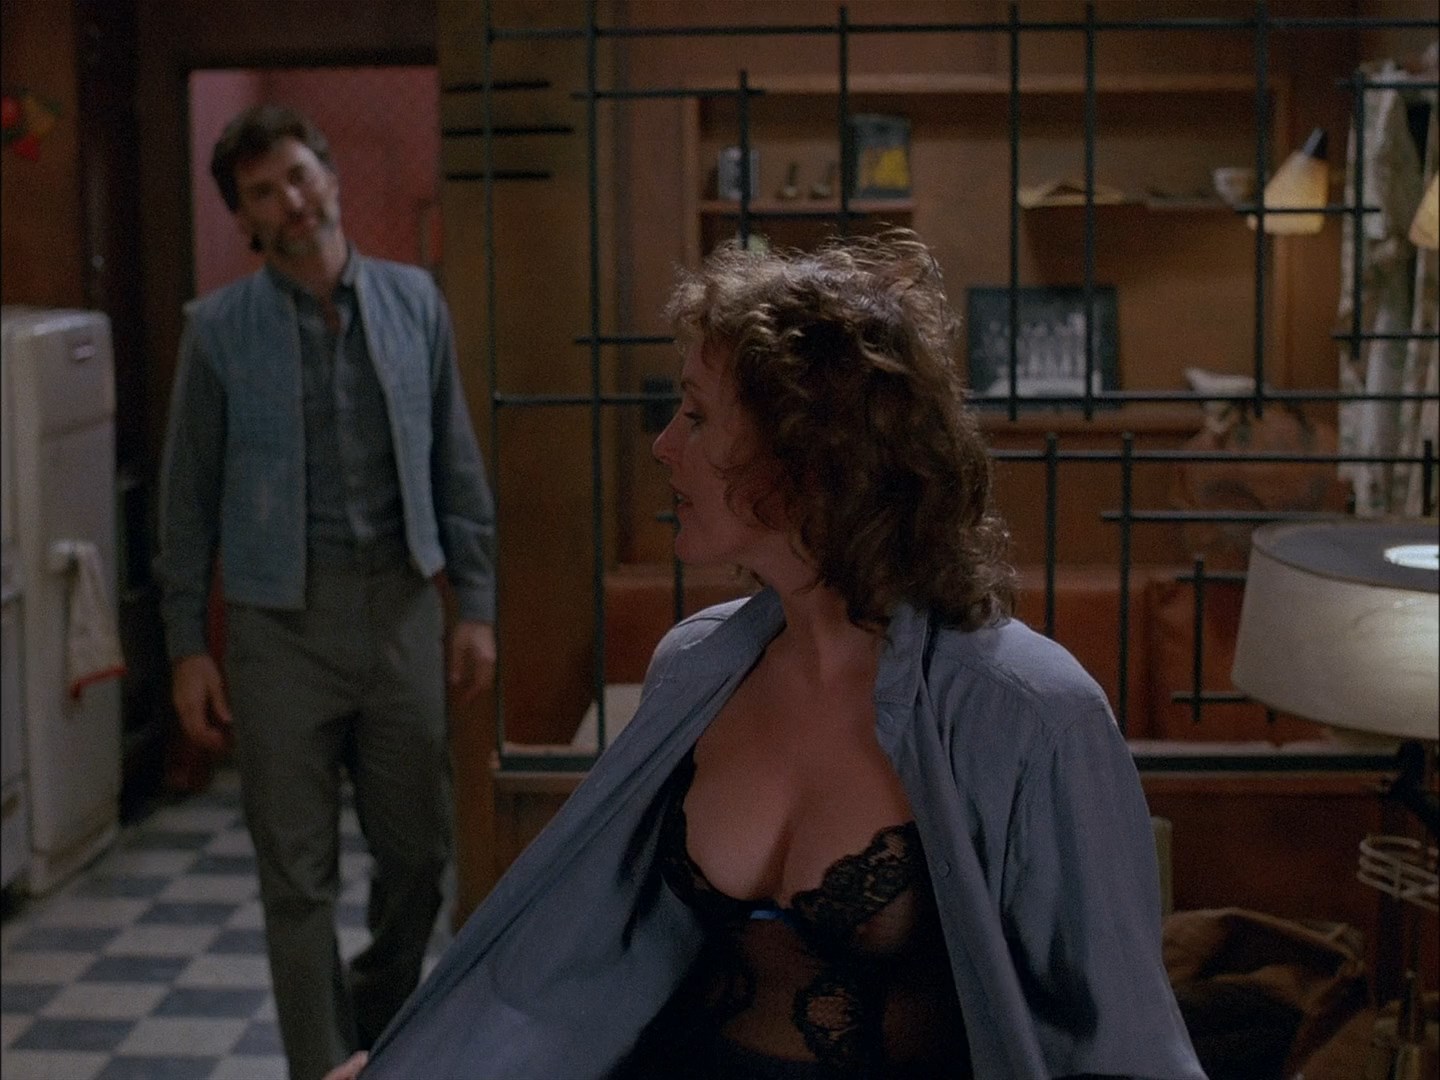 Bonnie Bedelia shows amazing cleavage while talking to some guy.